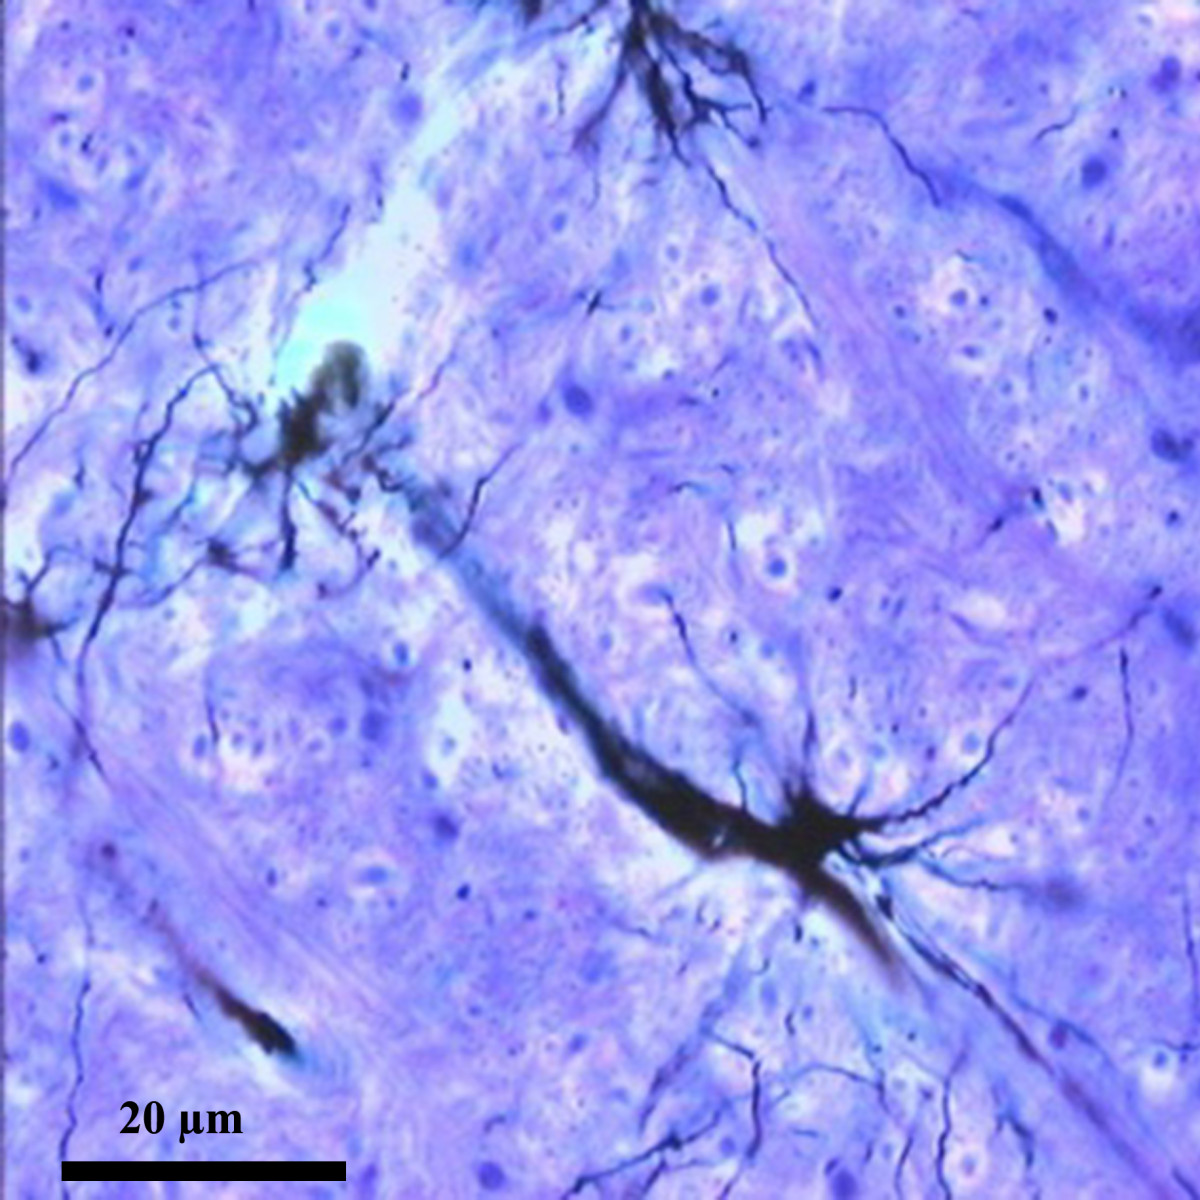 Protoplasmic astrocyte proximal to a blood vessel